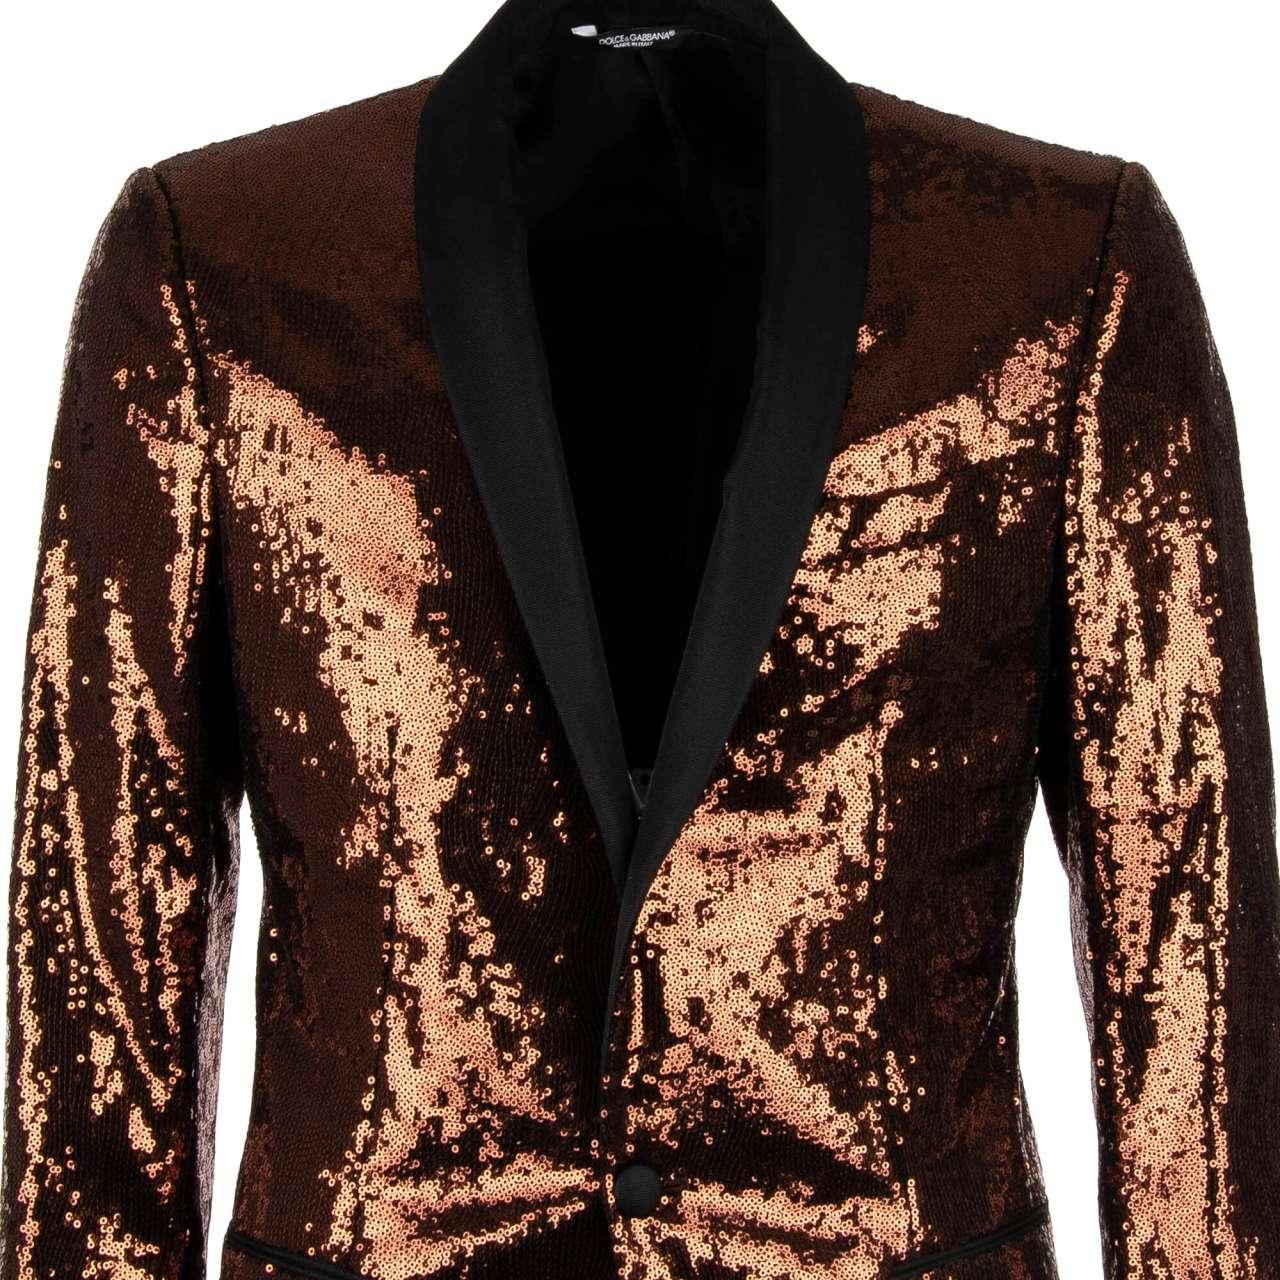 - Full sequined tuxedo / blazer MARTINI with a contrast black shawl lapel by DOLCE & GABBANA - RUNWAY - Dolce&Gabbana Fashion Show - Former RRP: EUR 2.750 - Made In Italy - New with Tag - Slim Fit - Model: G2JP7Z-FLMK4-M0230 - Material: 92%